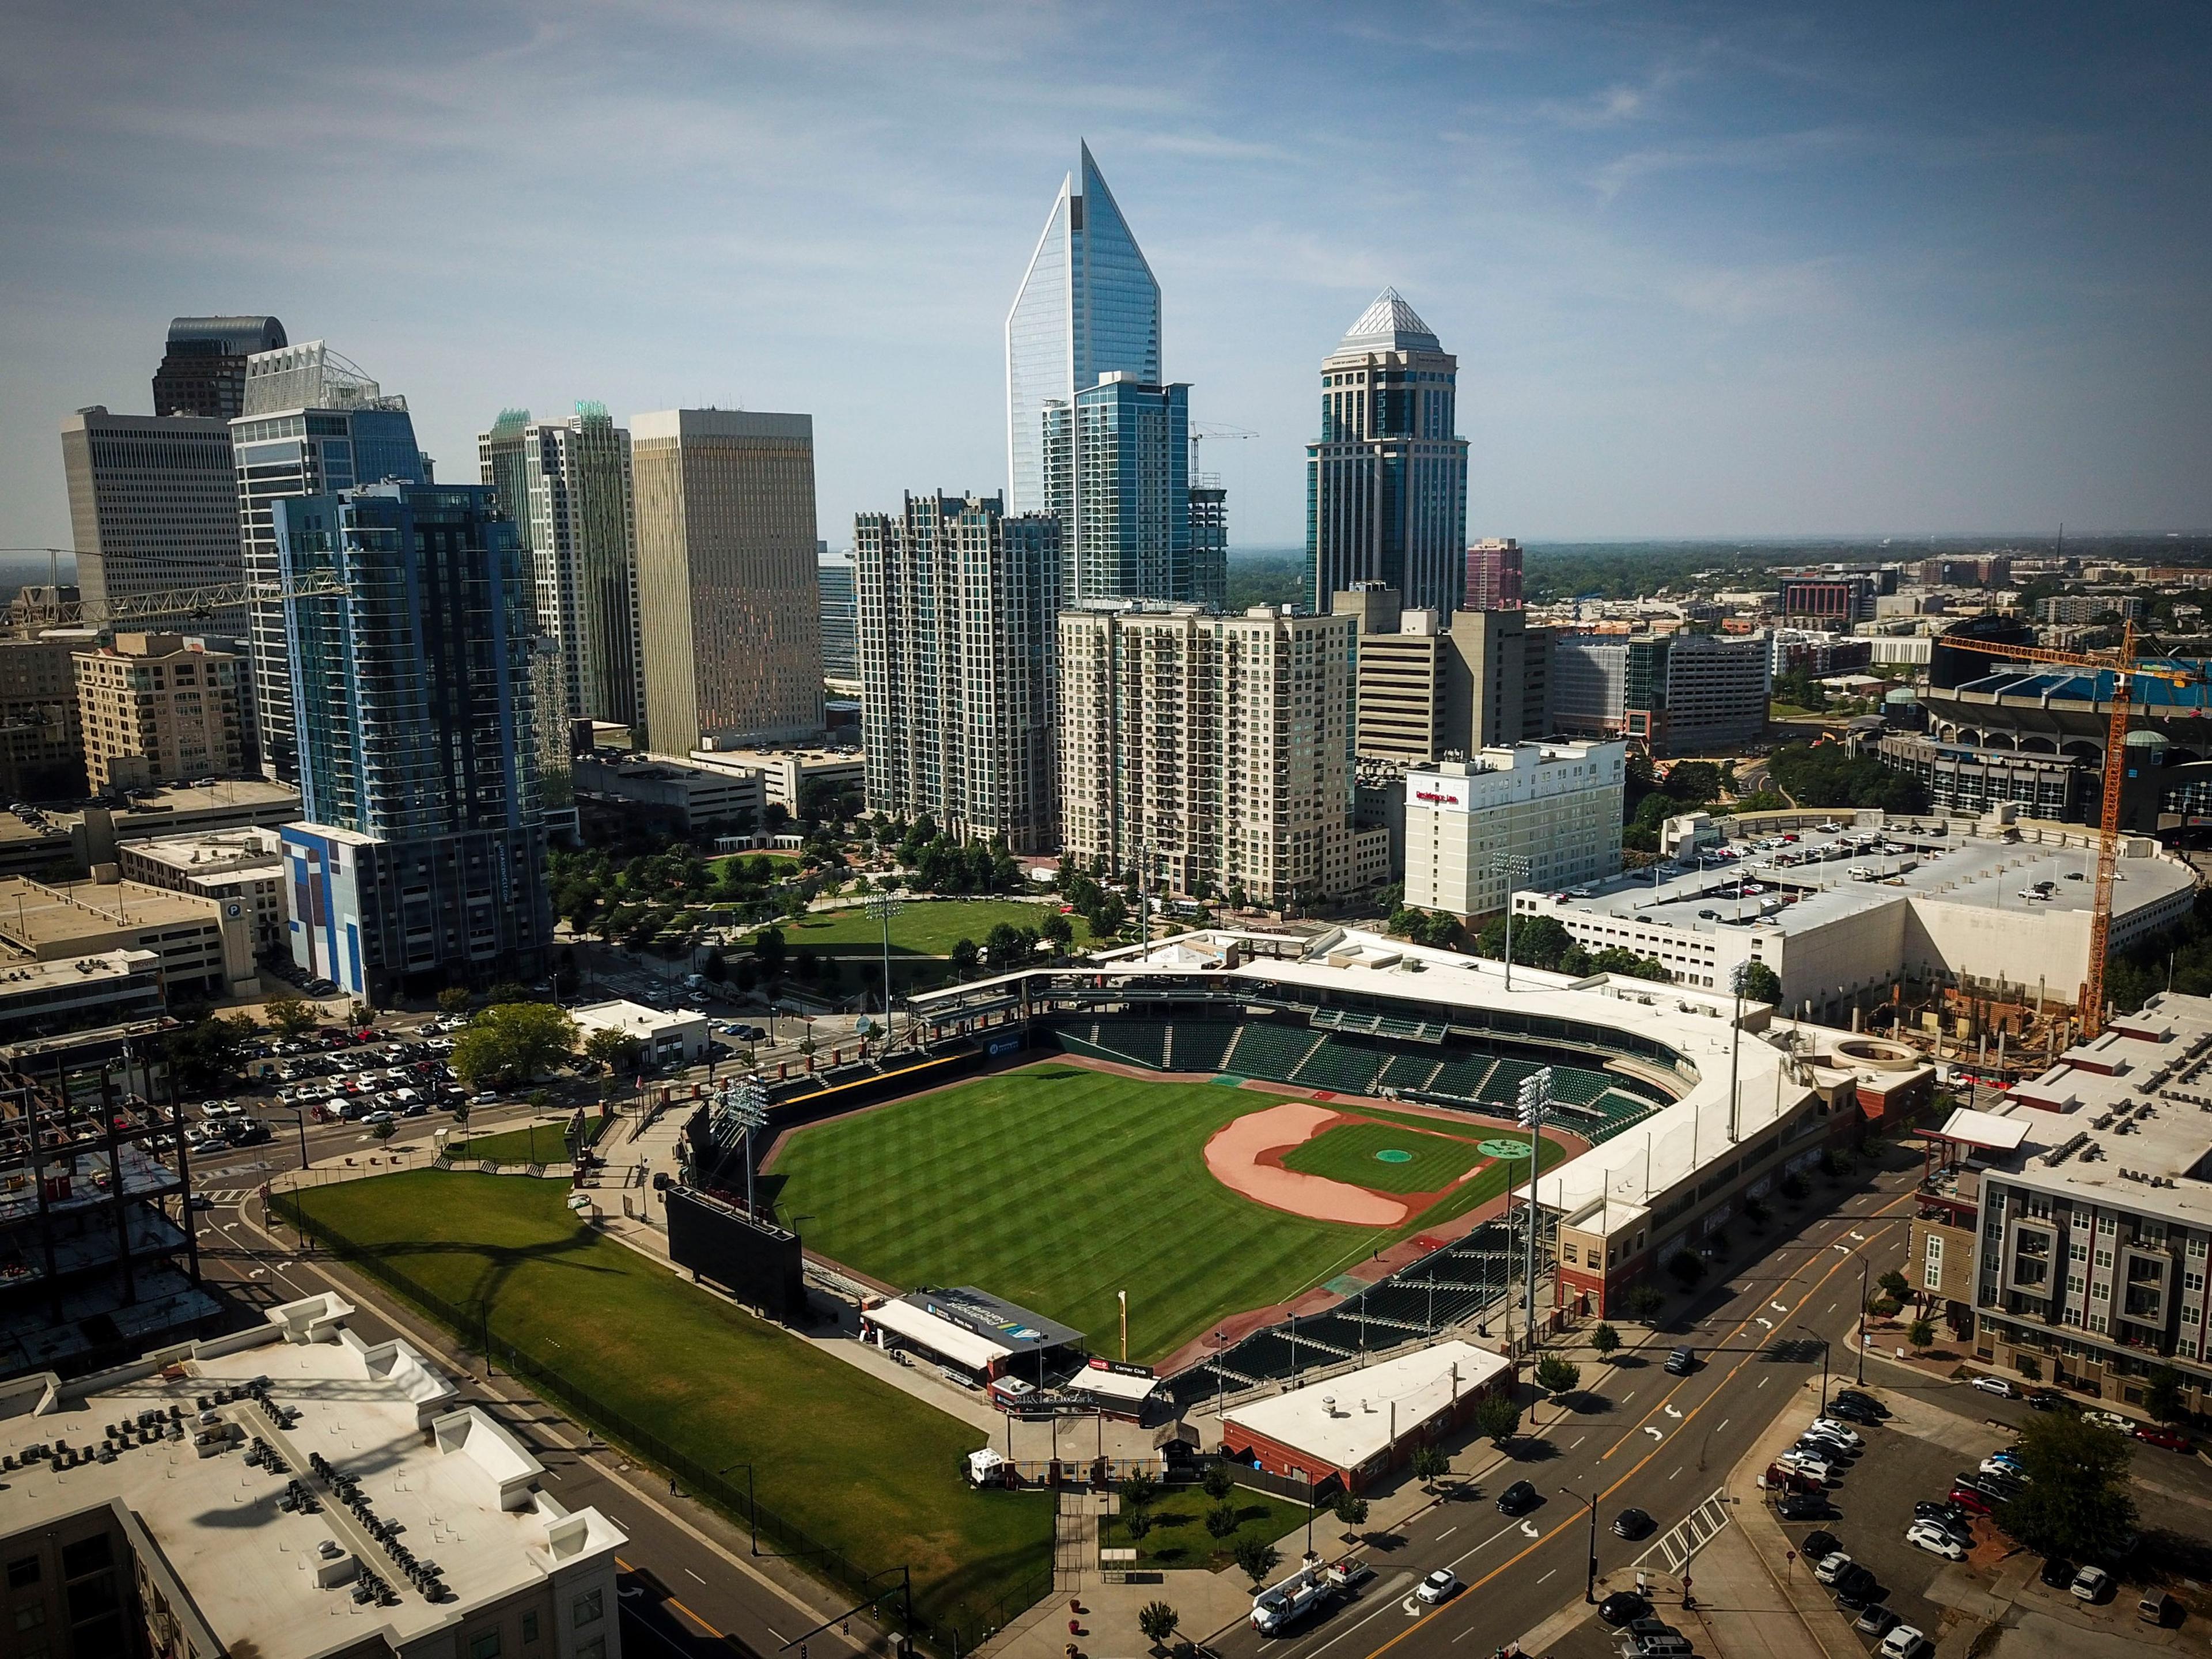 Explore Truist Field, home of the Charlotte Knights